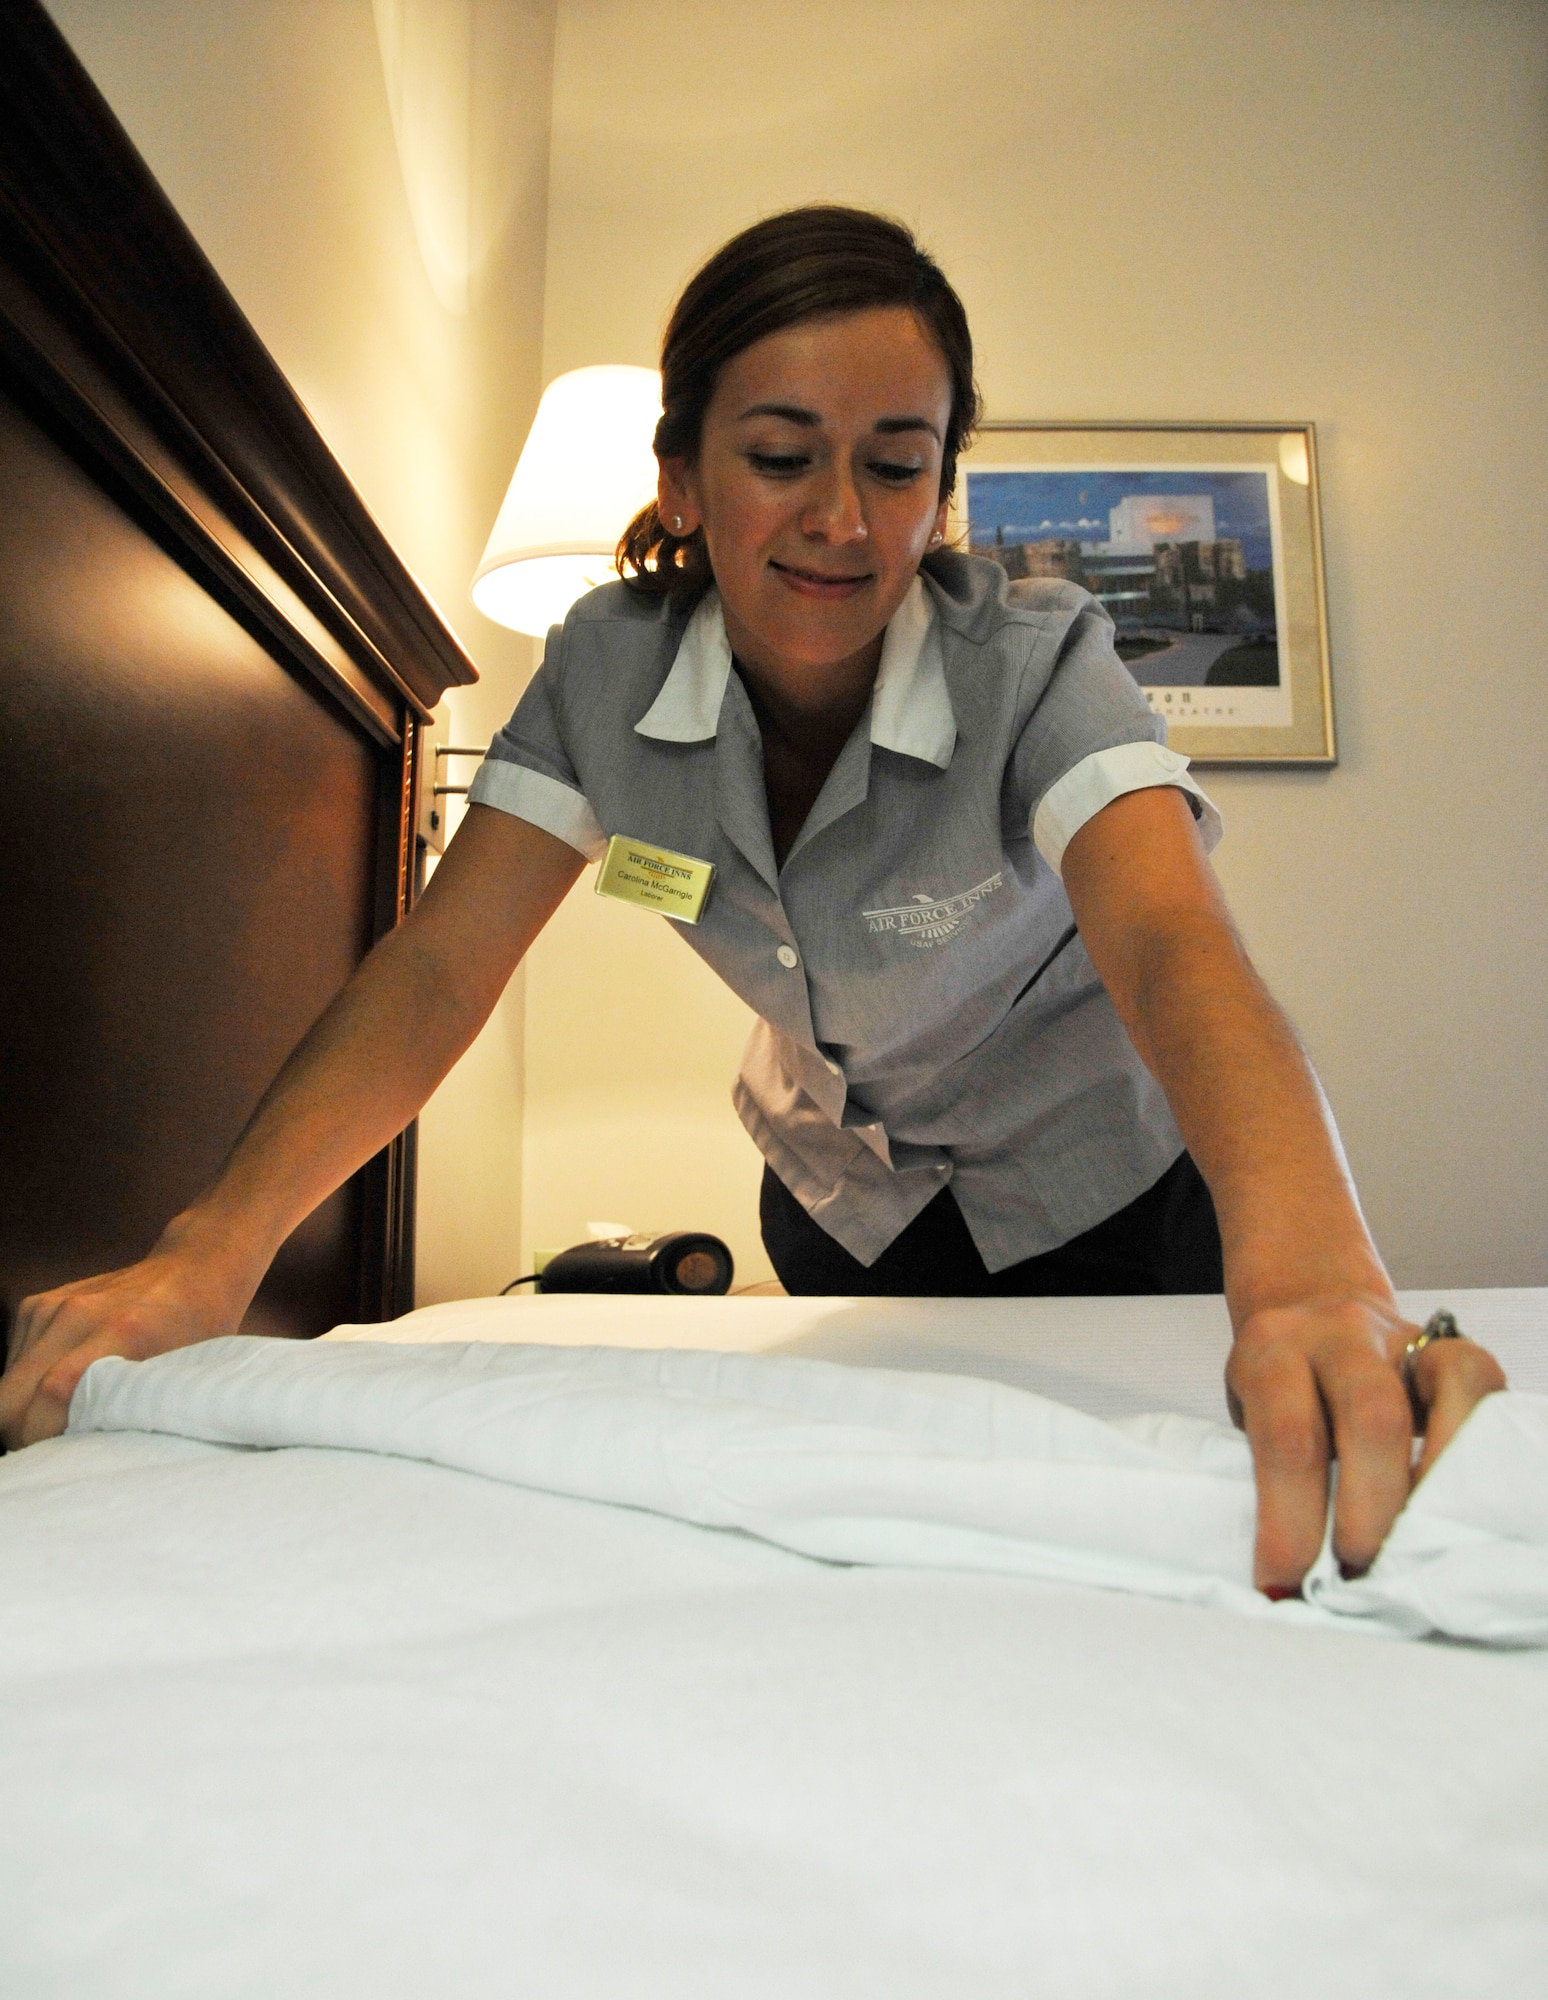 Carolina McGarrigle, 509th Force Support Squadron housekeeper, makes a bed at Whiteman Air Force Base, Mo., June 25, 2014. Preparing rooms are essential to providing presentable living areas for guests. (U.S. Air Force photo by Airman 1st Class Keenan Berry/Released)